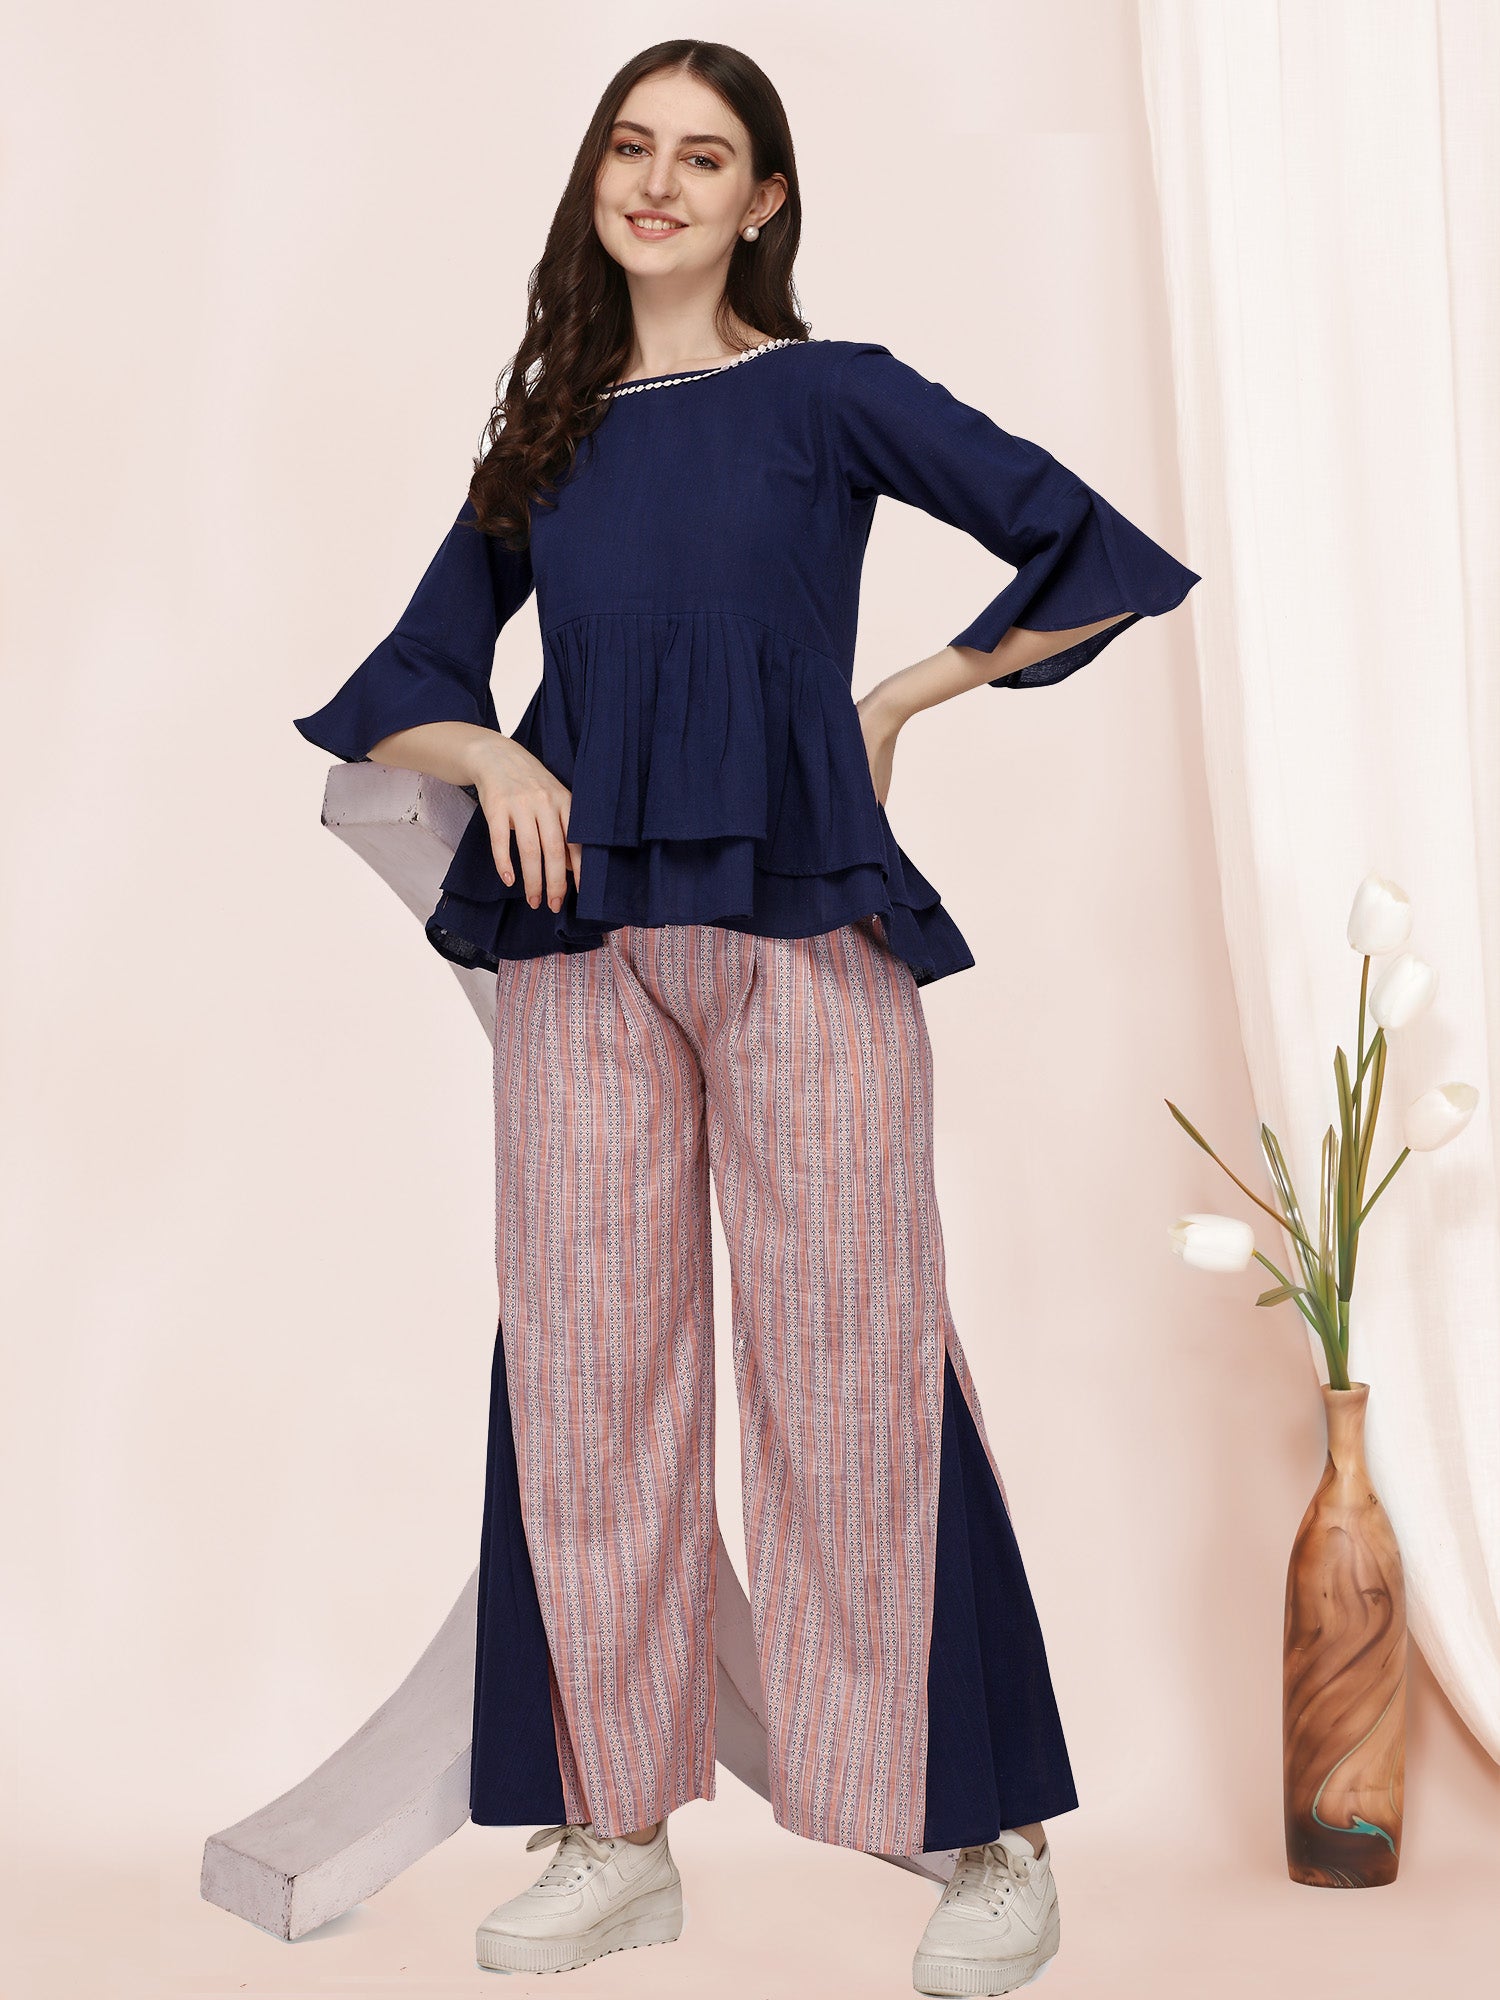 Women's Daily Wear Navy Blue Pleated Peplum Top With Strip Palazzo Pant - MESMORA FASHION